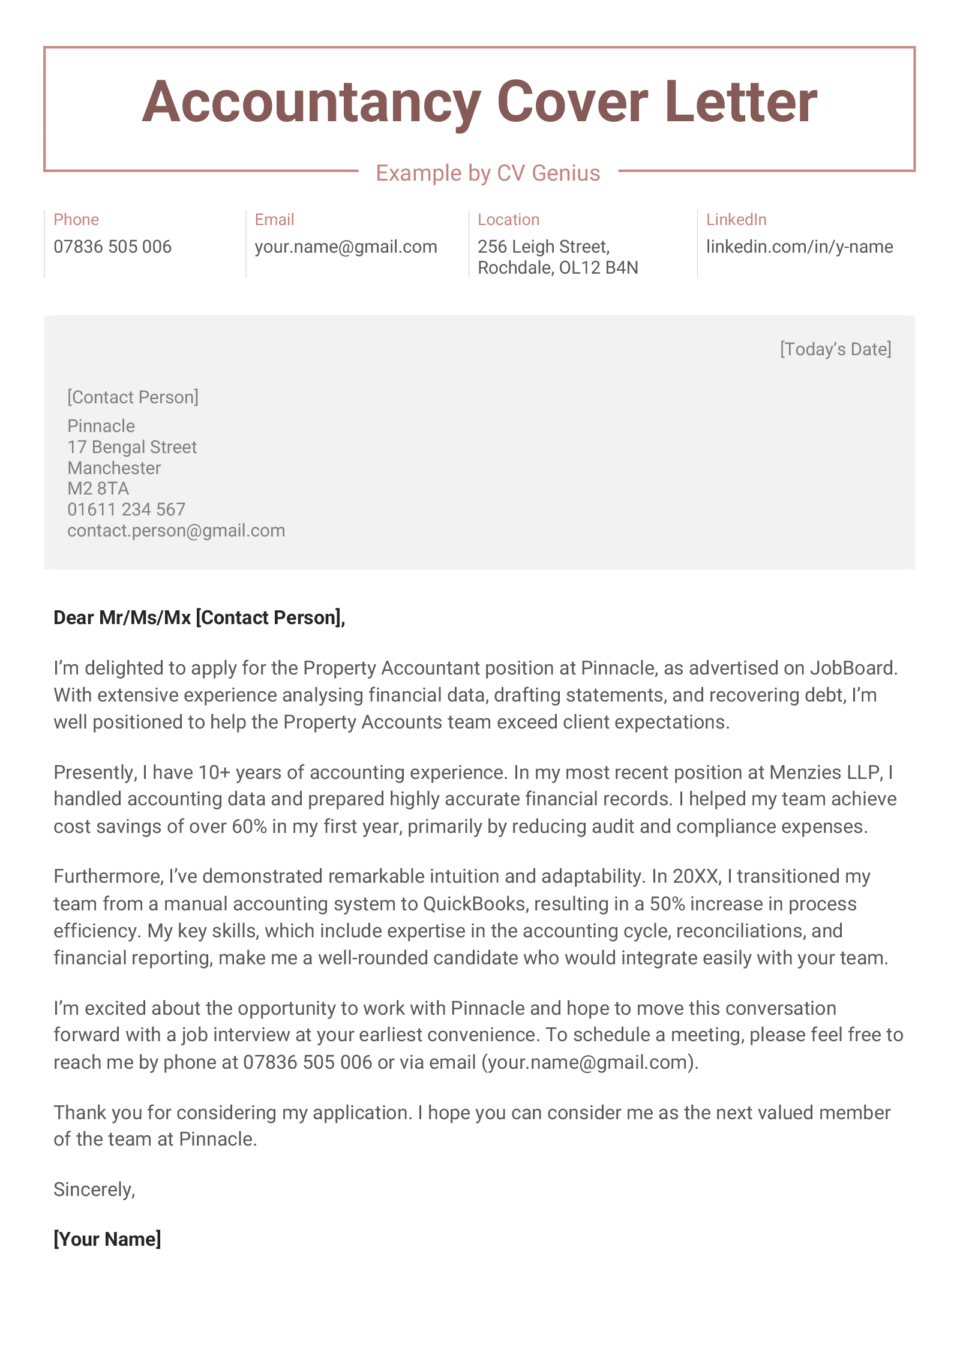 A sample accountancy cover letter with maroon header text, grey recipient's address, and a few paragraphs of text outlining the applicants accounting skills and relevant achievements.